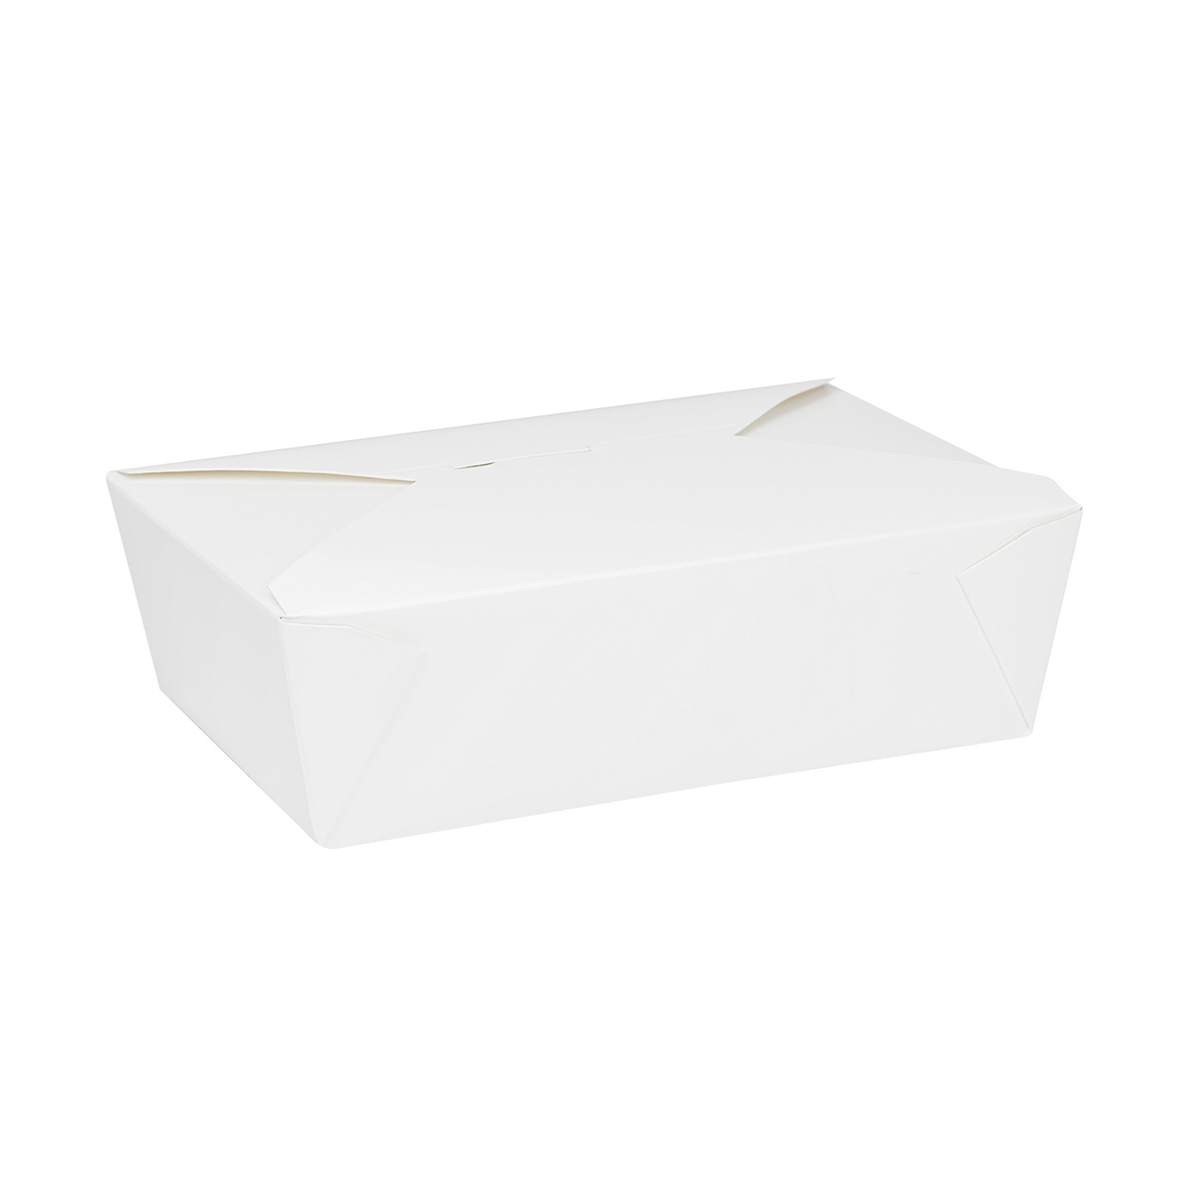 9''x9'' Hinged Takeout Boxes- Extra Large Clamshell Containers - Karat PET  Plastic - 200 ct